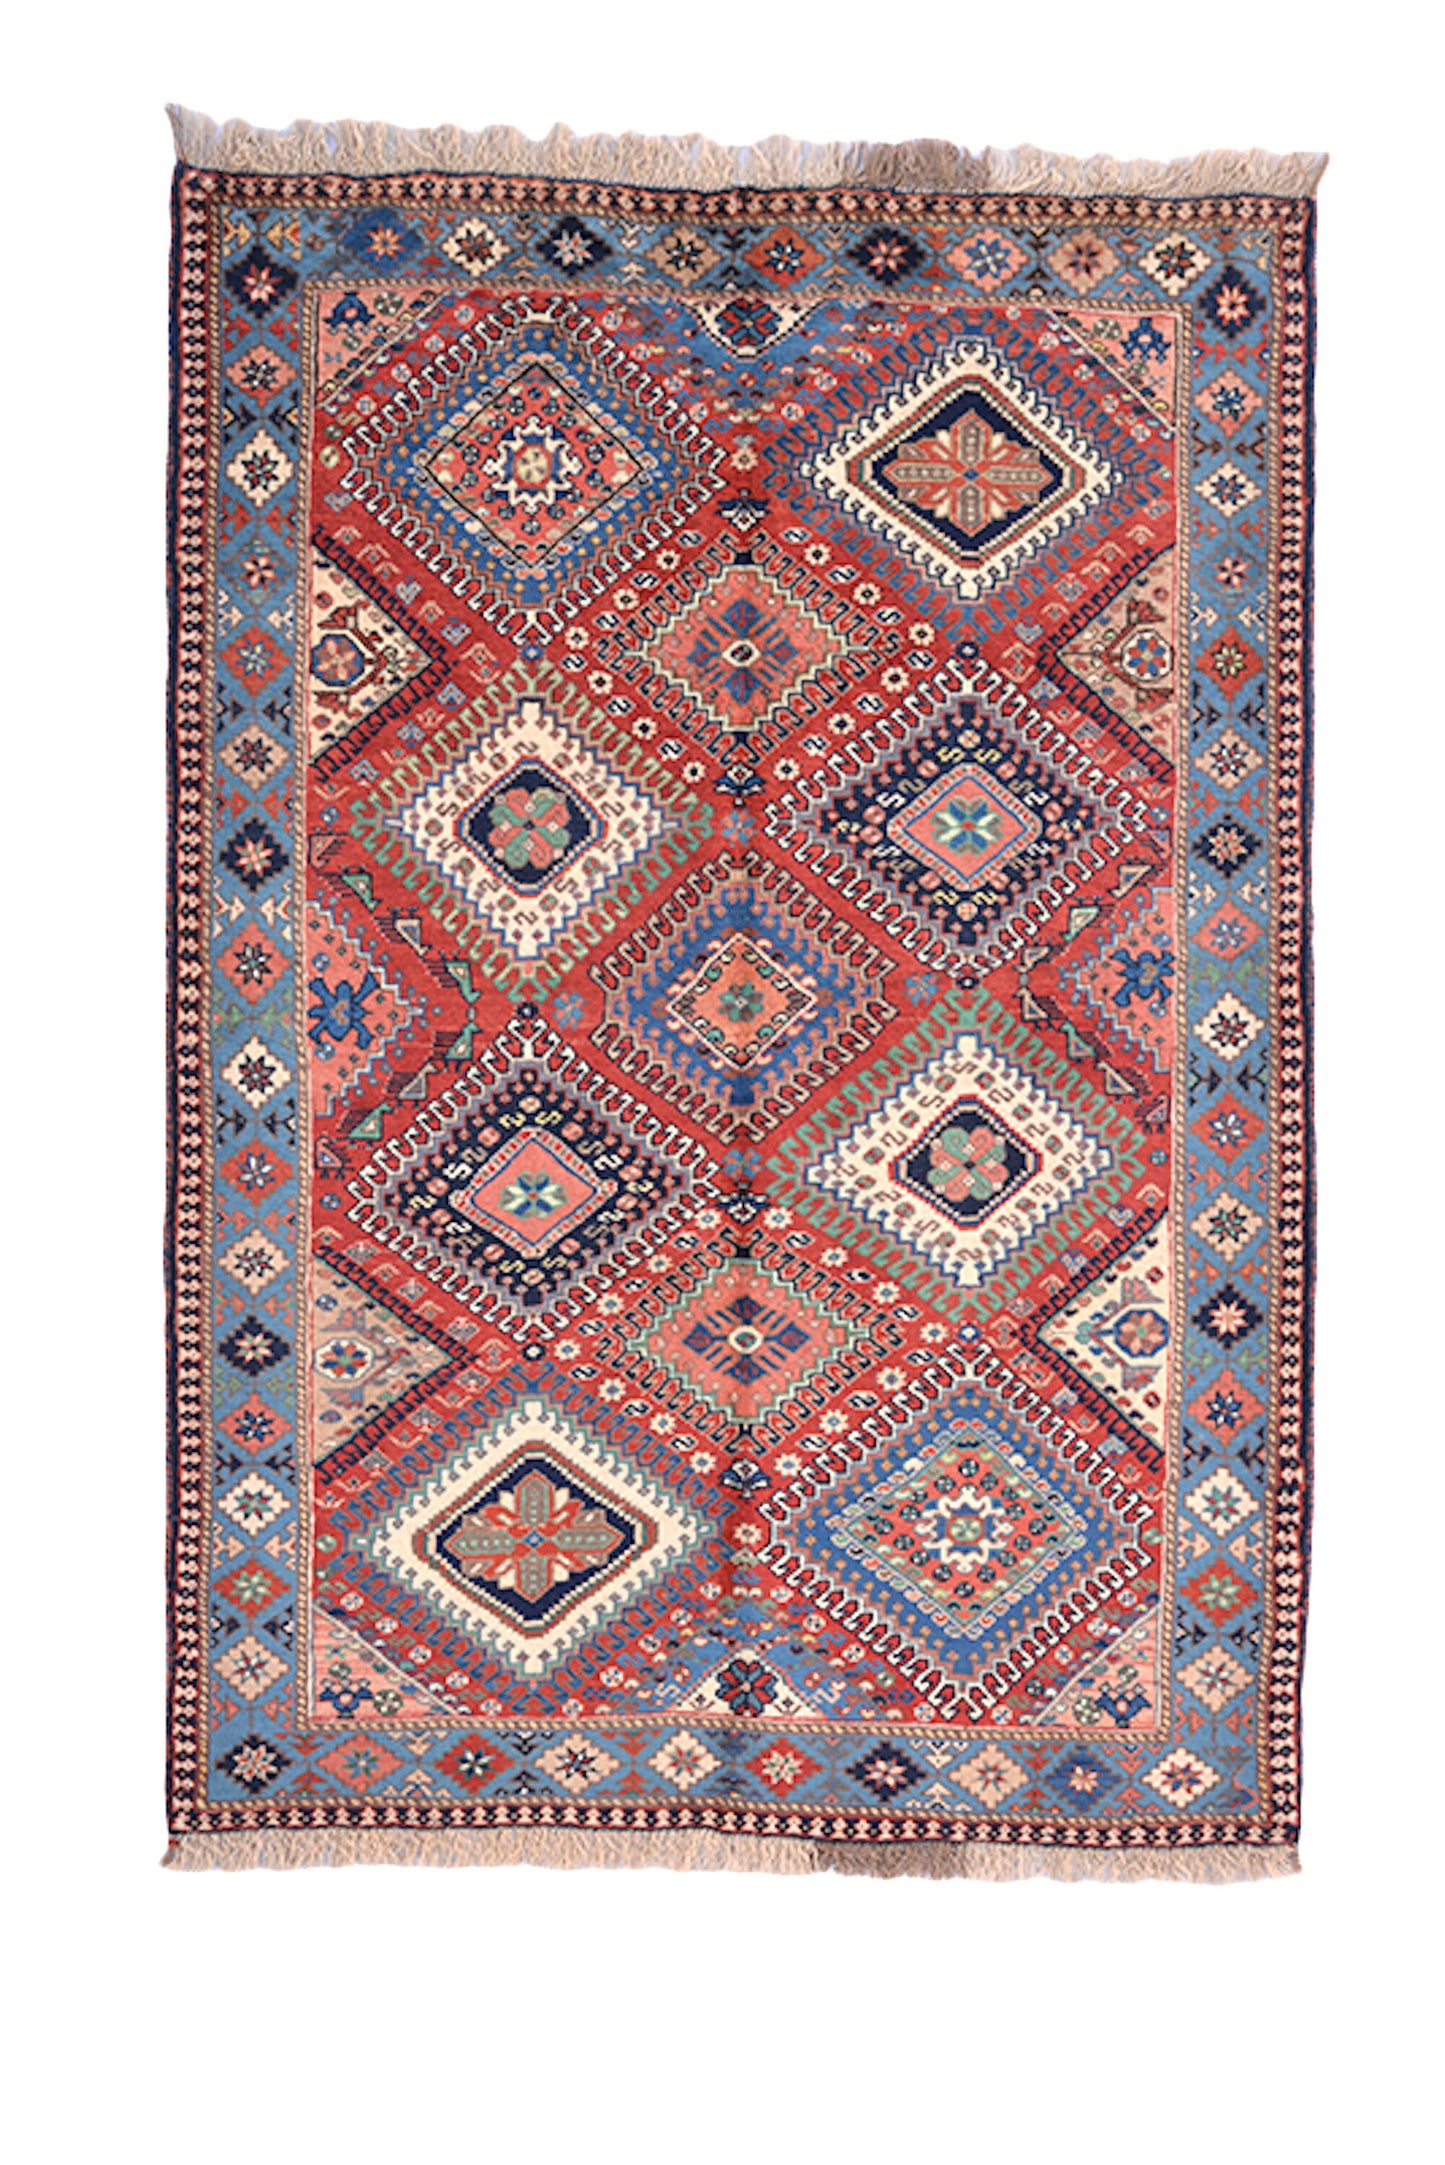 3 x 5 Feet Colorful Turkish Caucasian Rug | Hand Knotted Area Rug | Oriental Persian Rug | Living Room Rug | Accent Floral Pattern Wool Rug